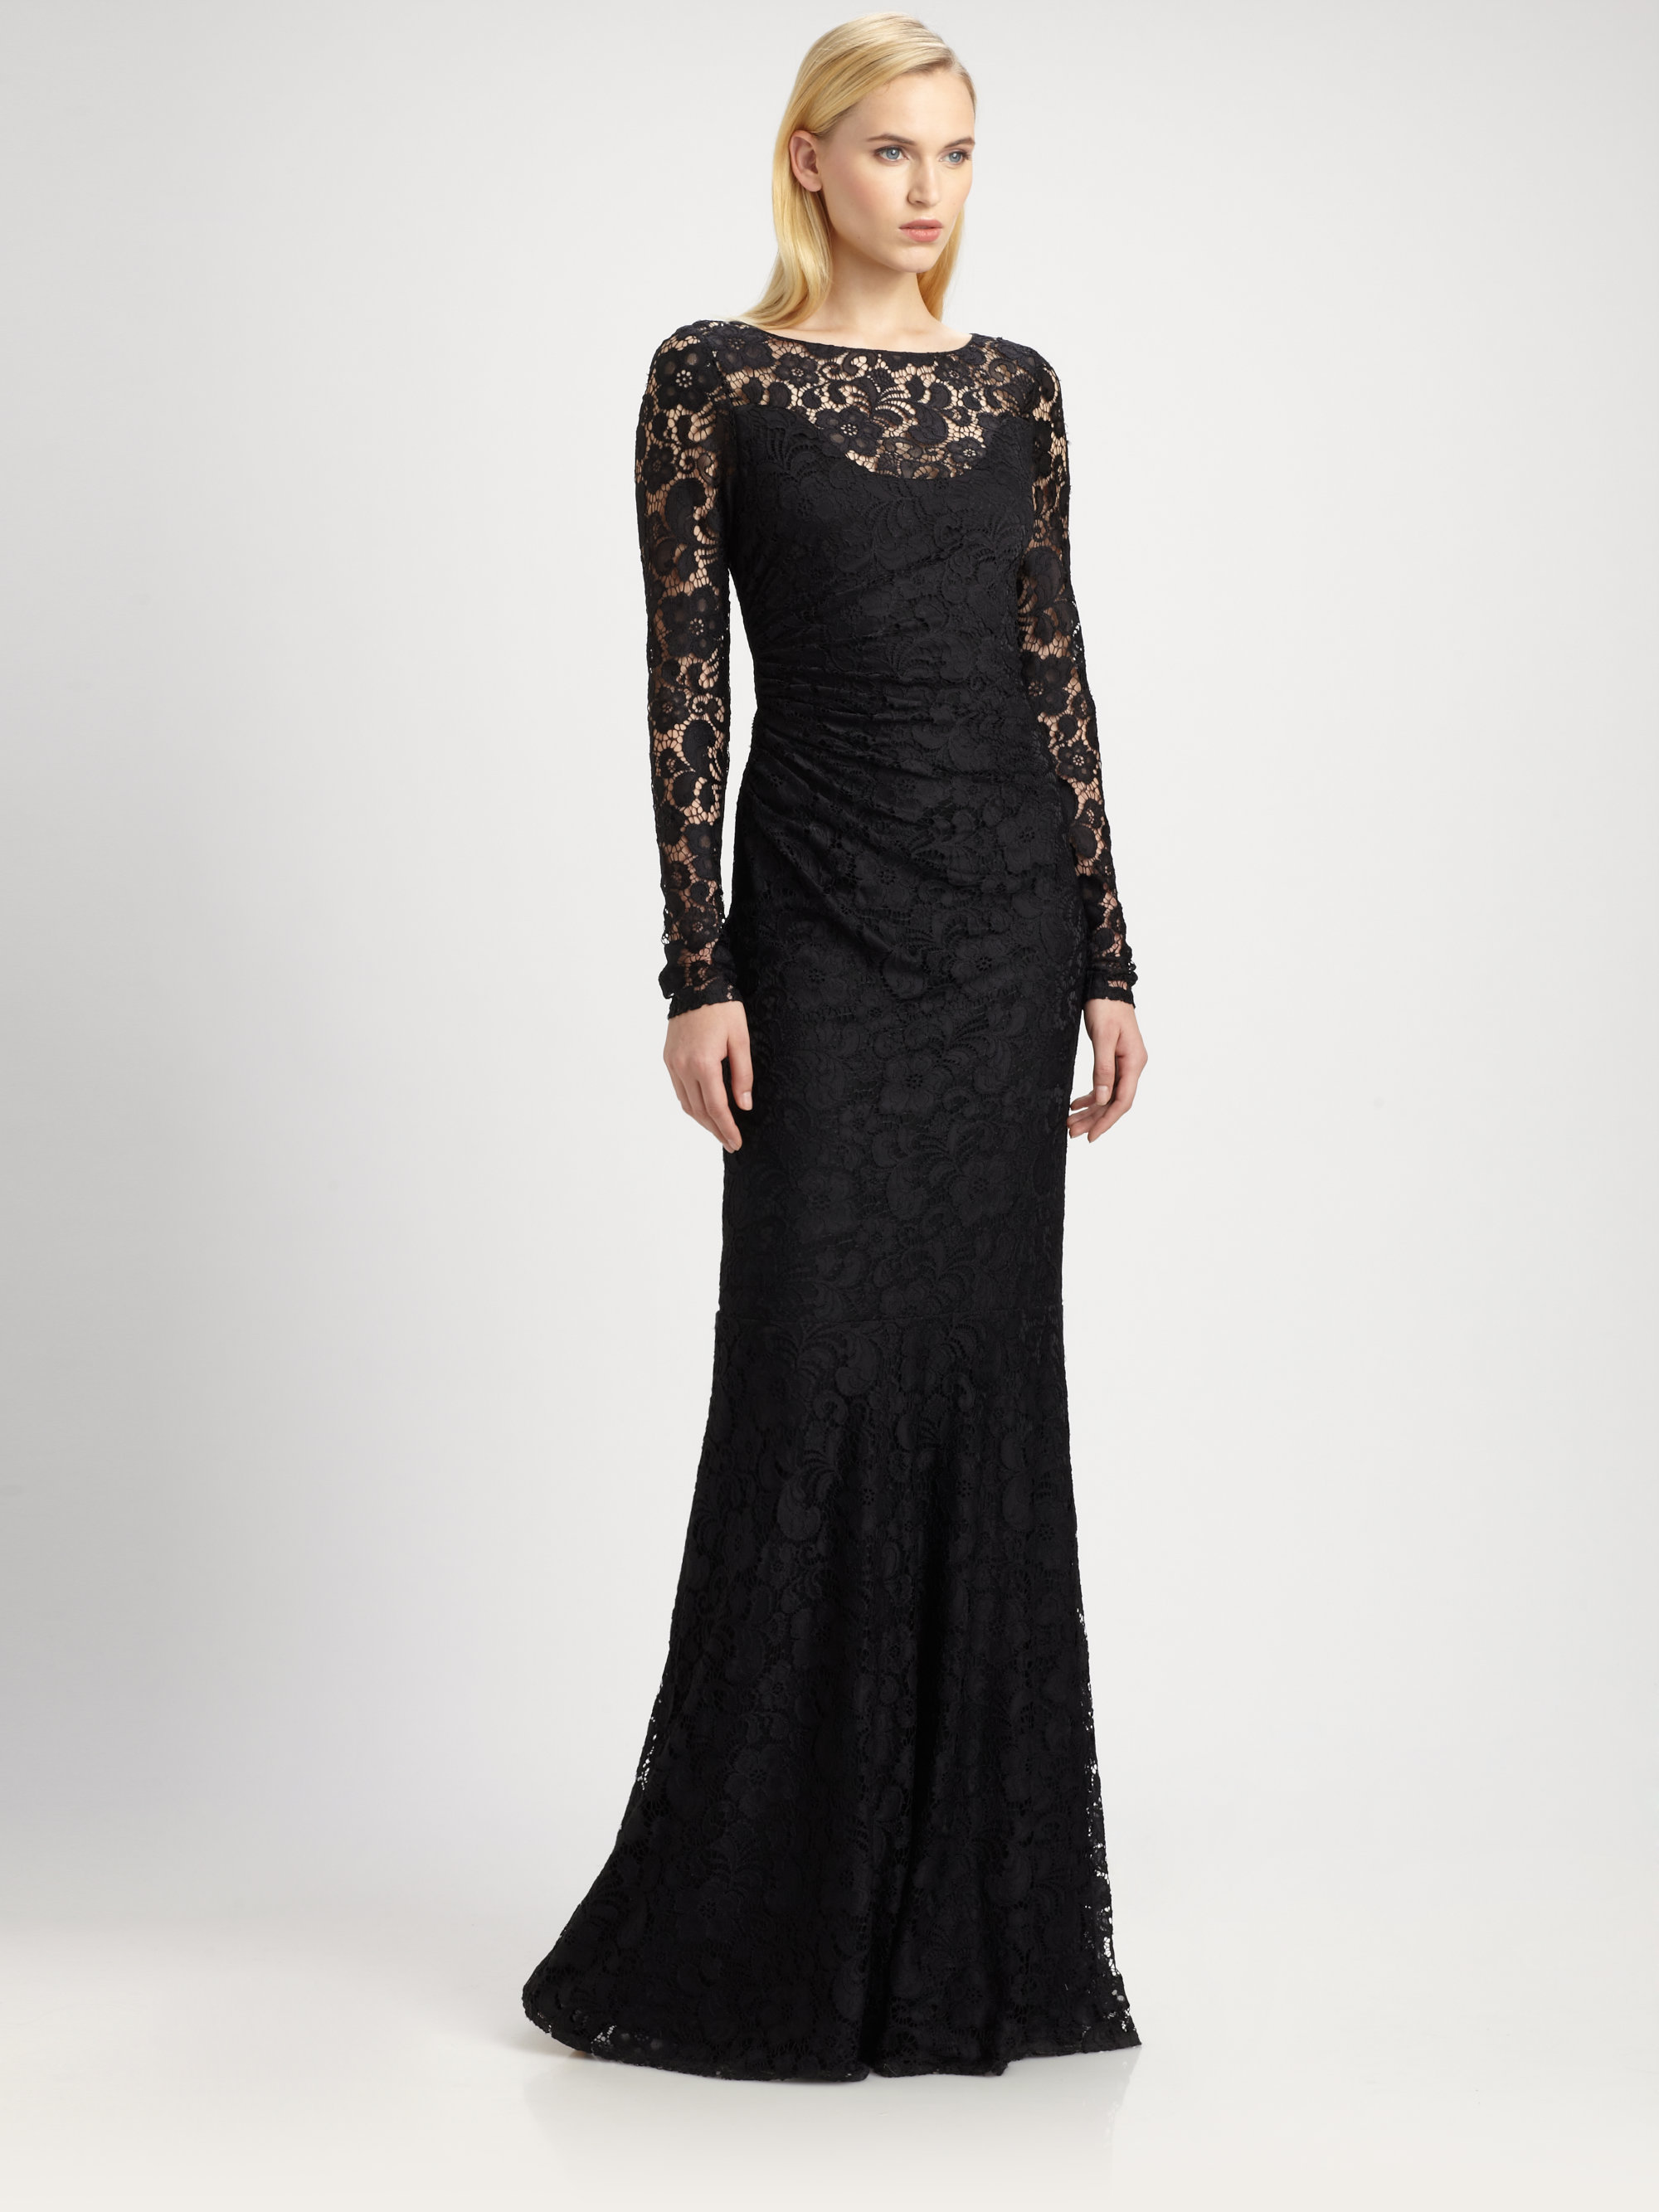 Lyst - David meister Lace Gown in Black